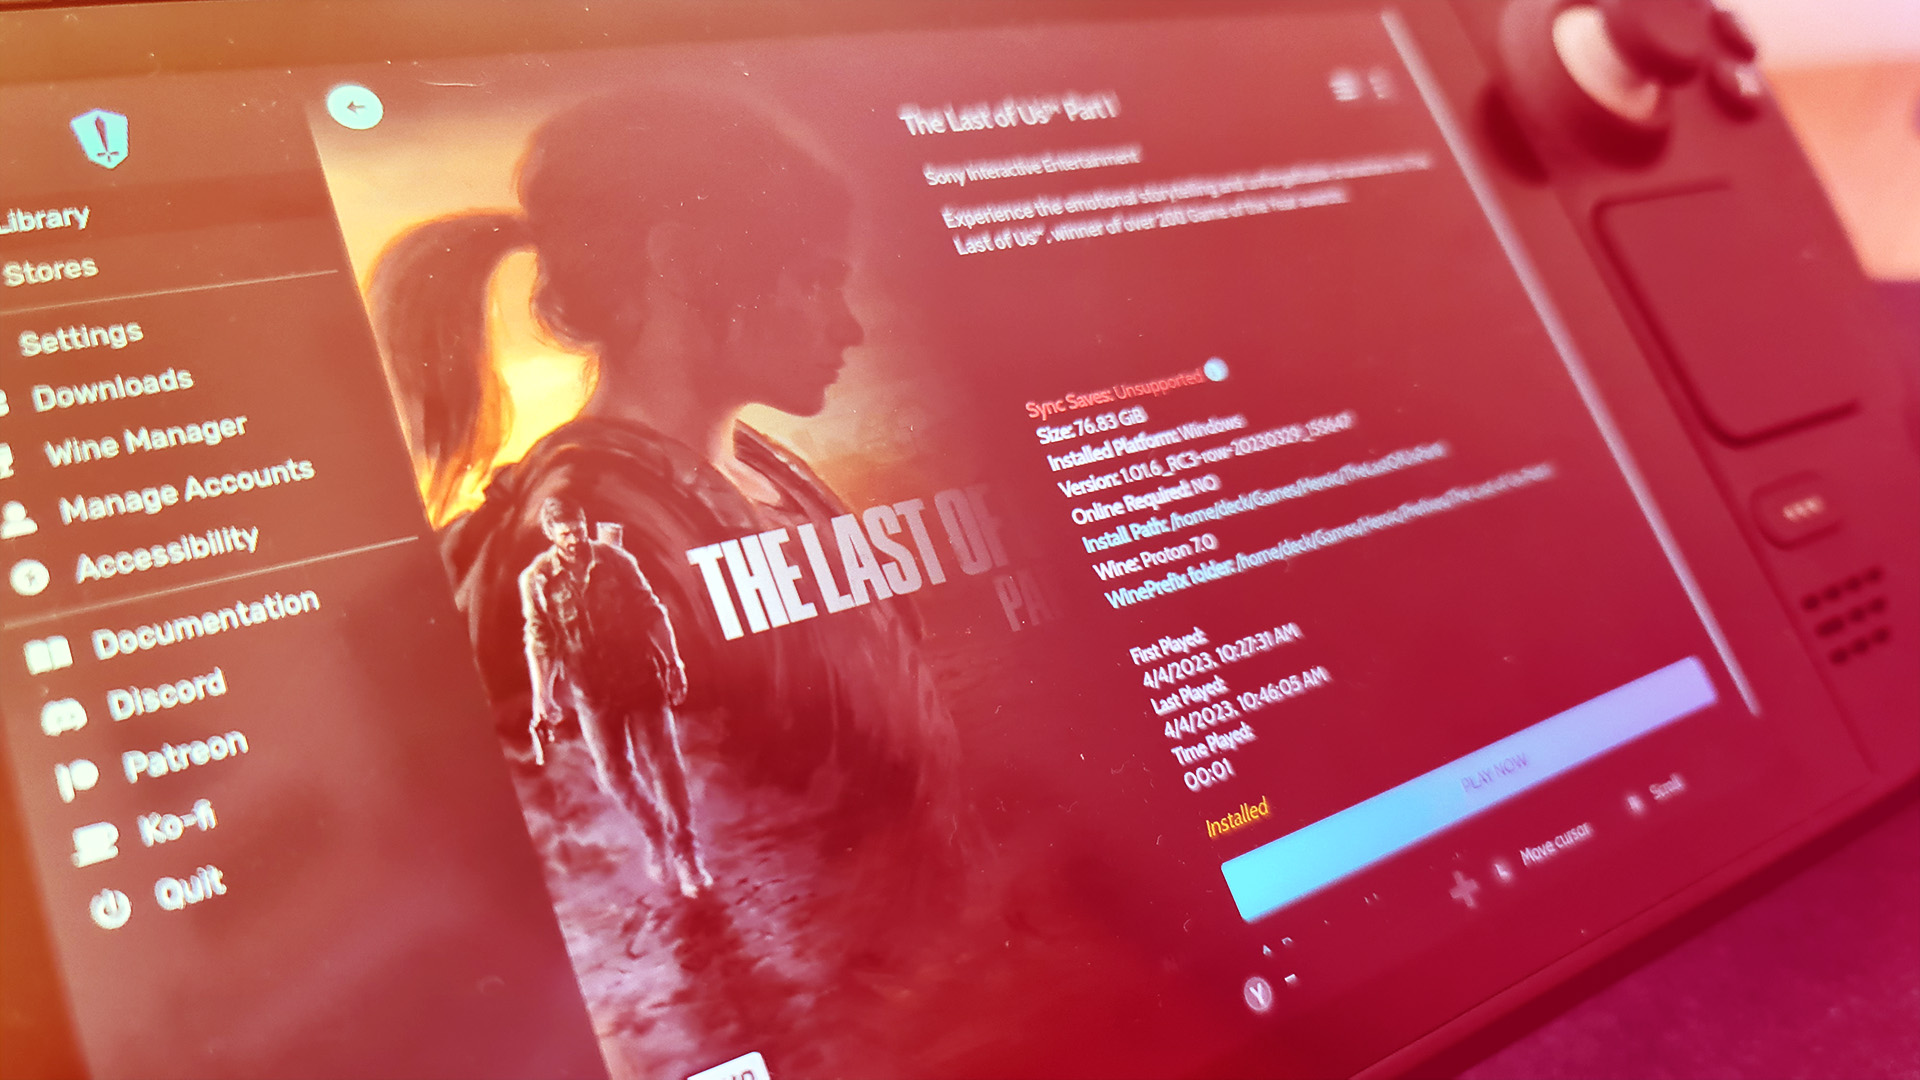 Naughty Dog Responds to AWFUL The Last of Us PC Port - Negative Steam  Reviews, Crashing + MORE! 